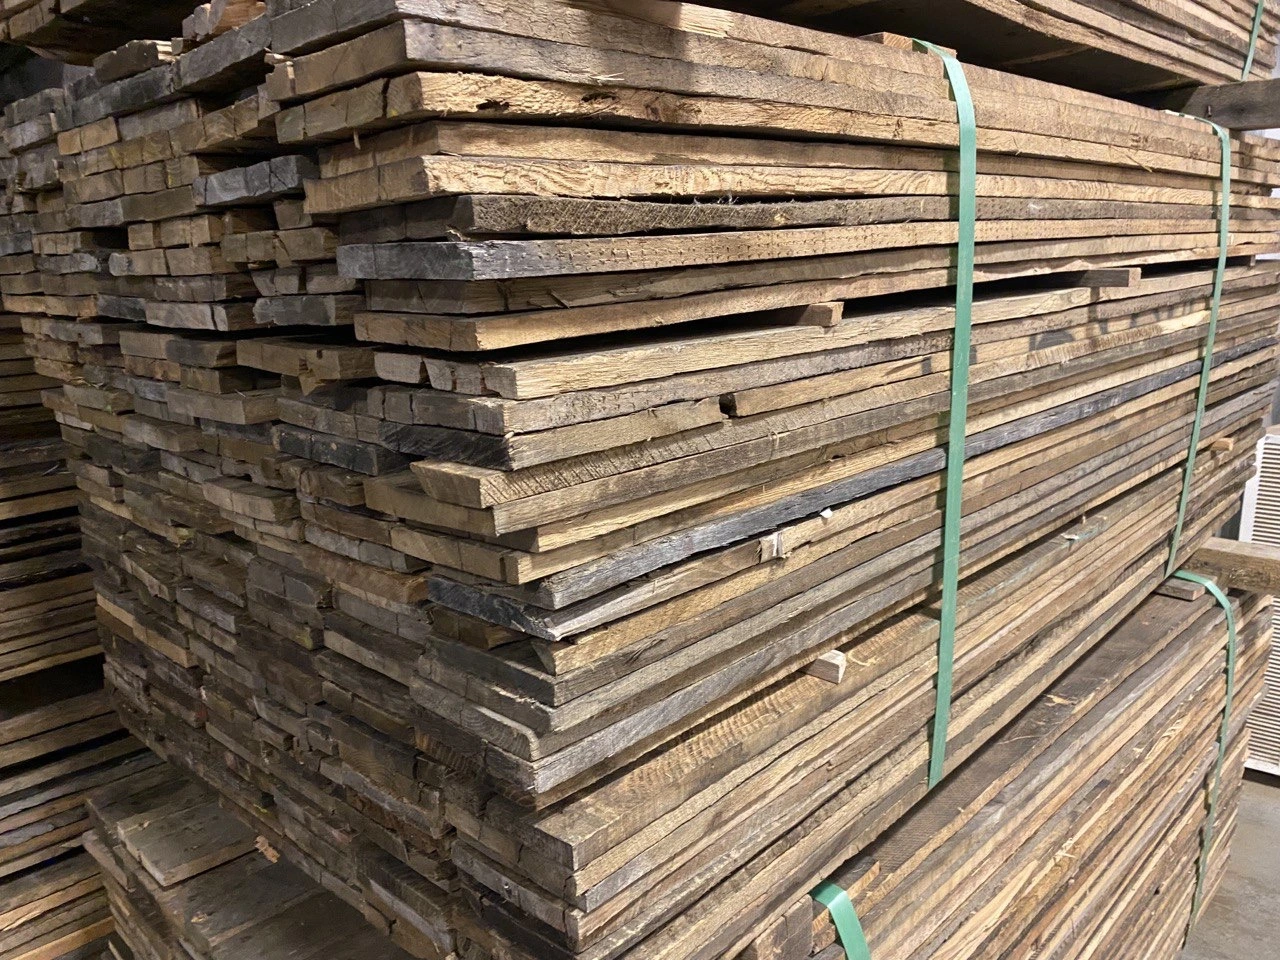 A stack of wooden planks in a warehouse.